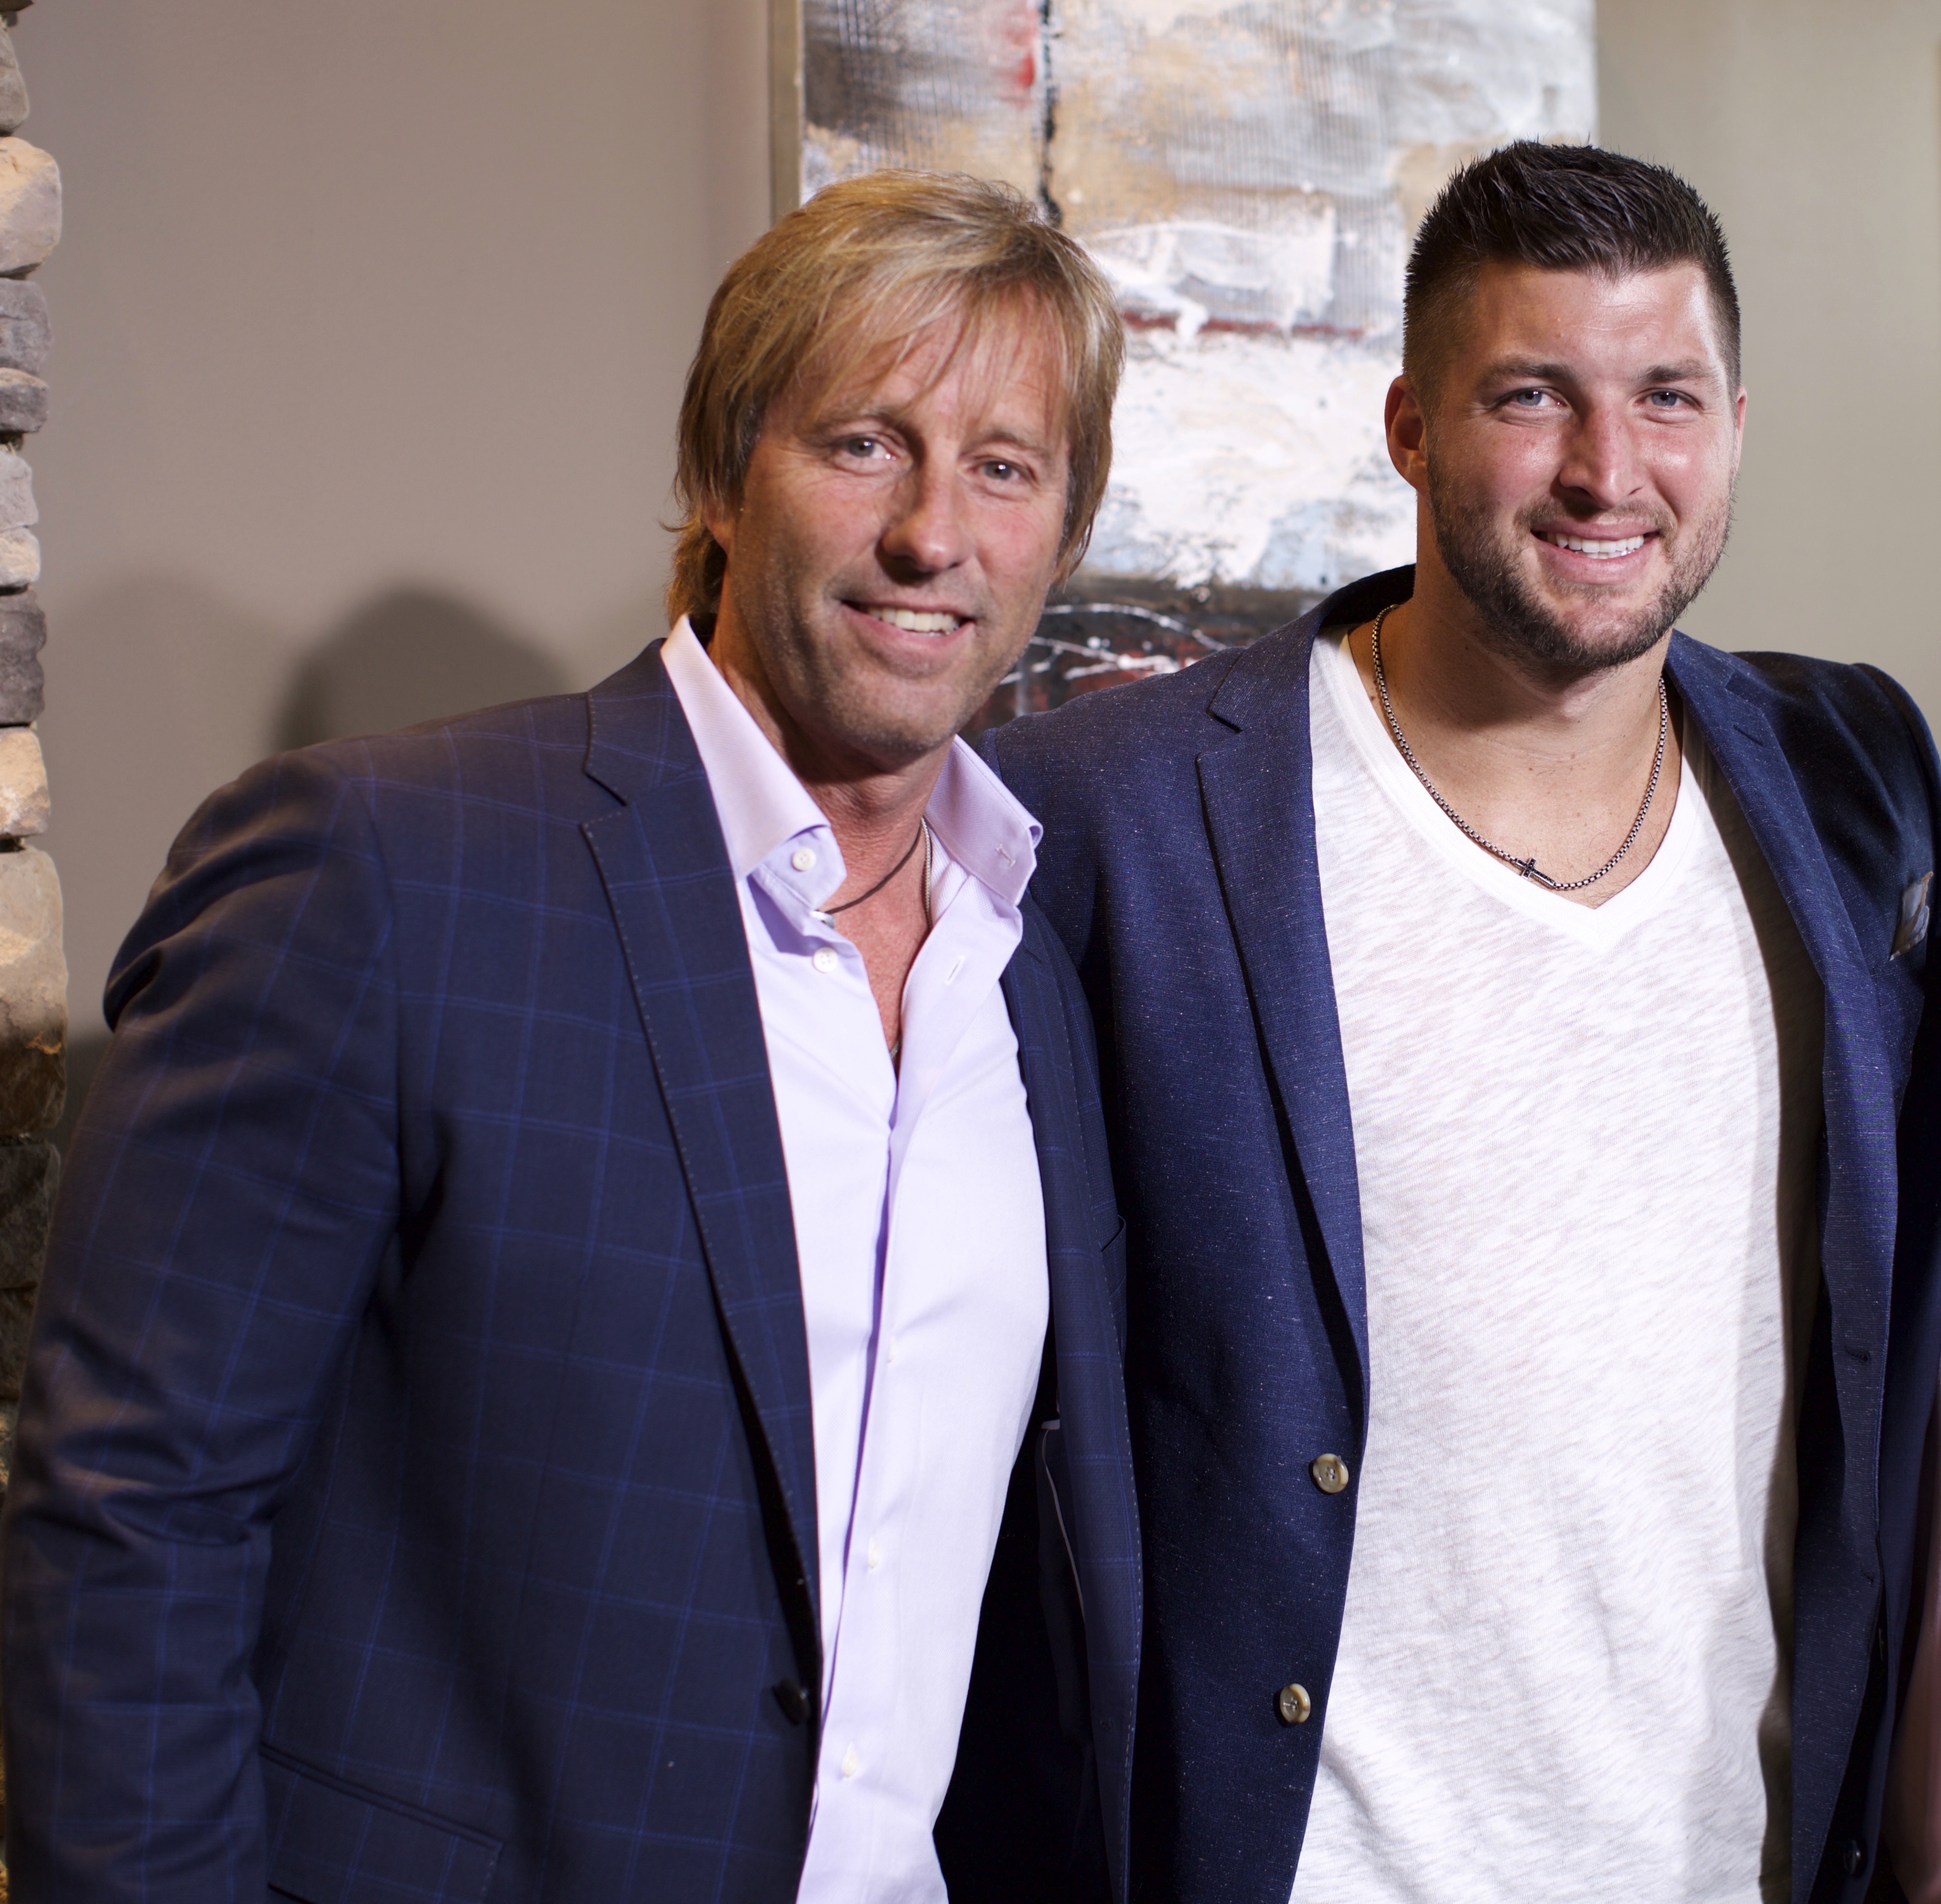 Henry Penix and Tim Tebow at Event